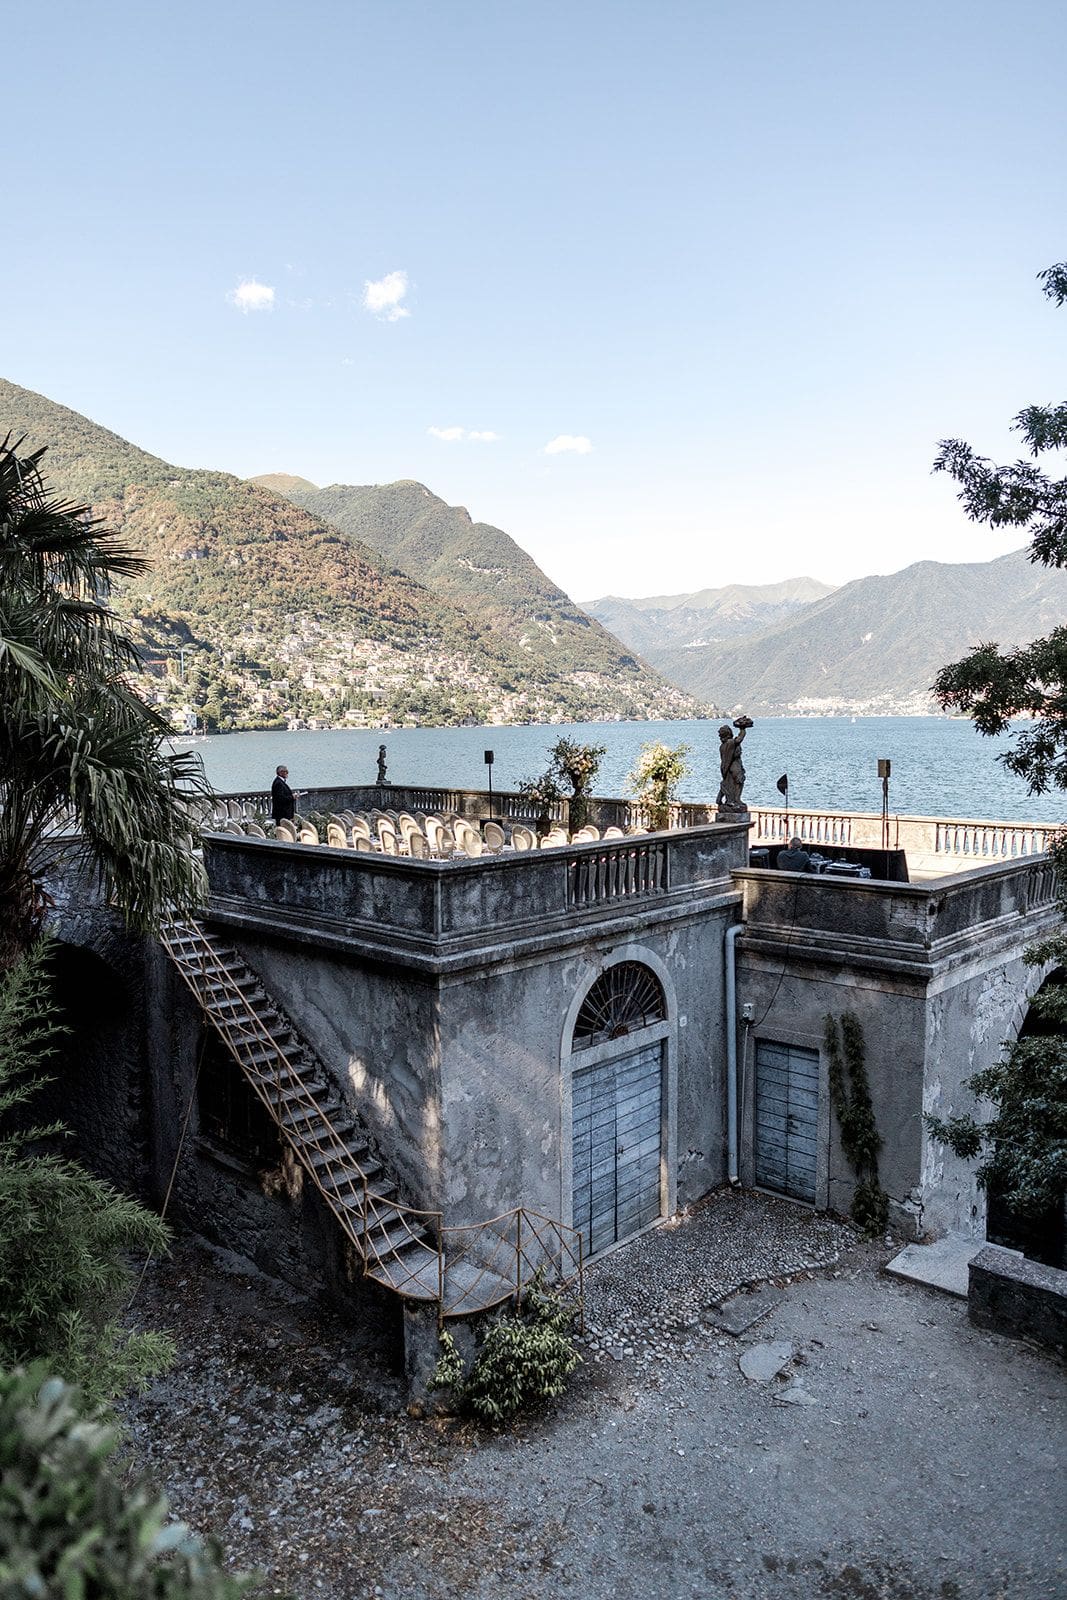 Villa Pizzo's rooftop ceremony site for weddings in Lake Como